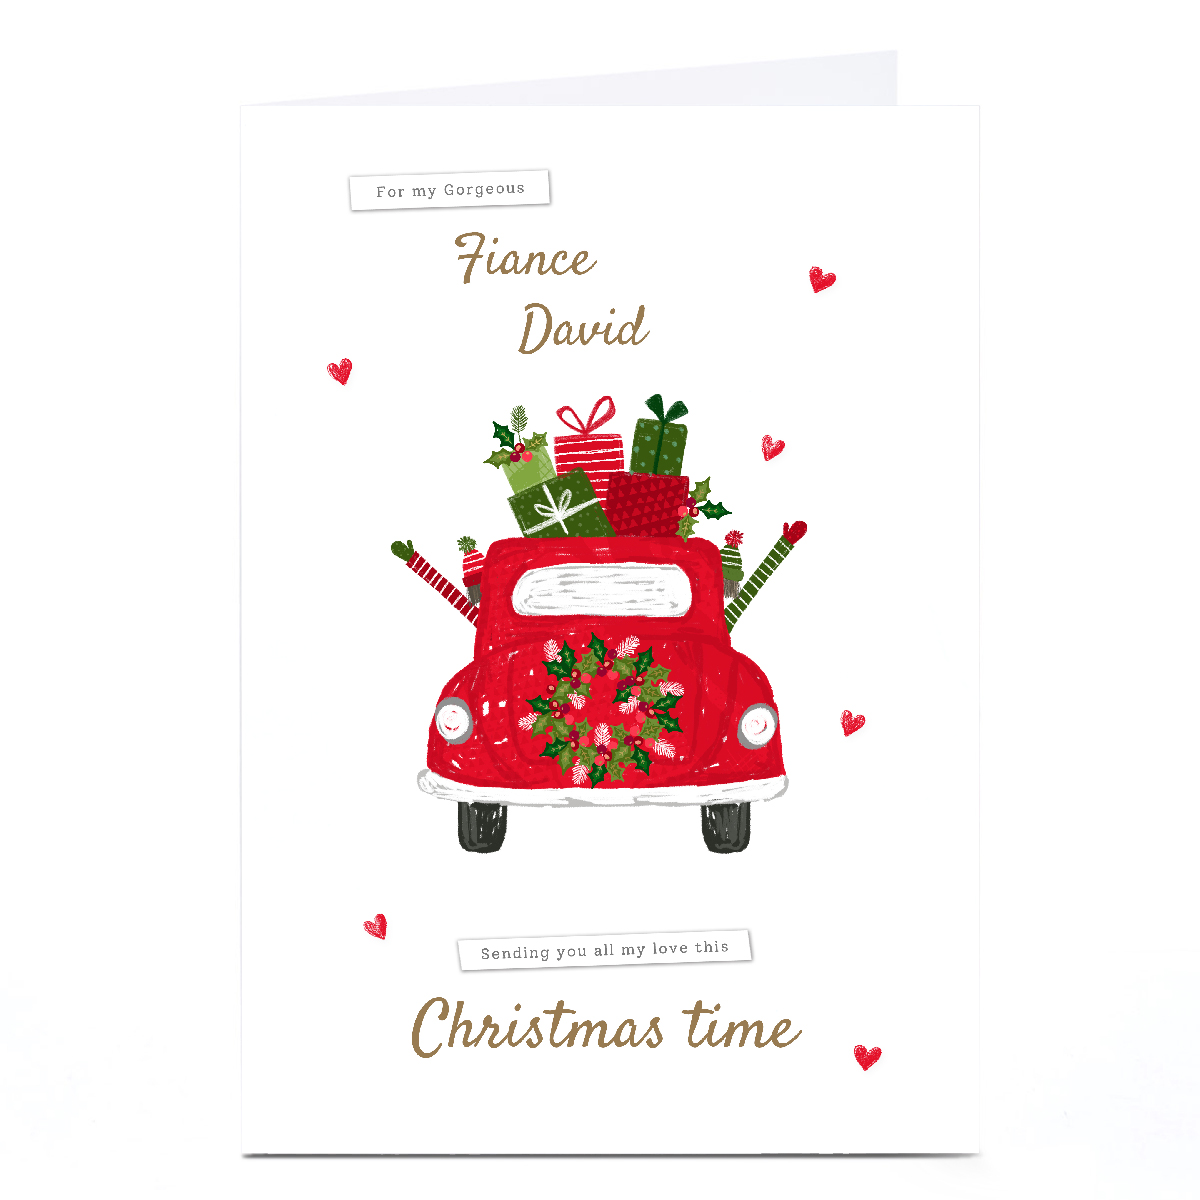 Personalised Kerry Spurling Christmas Card - Fiance